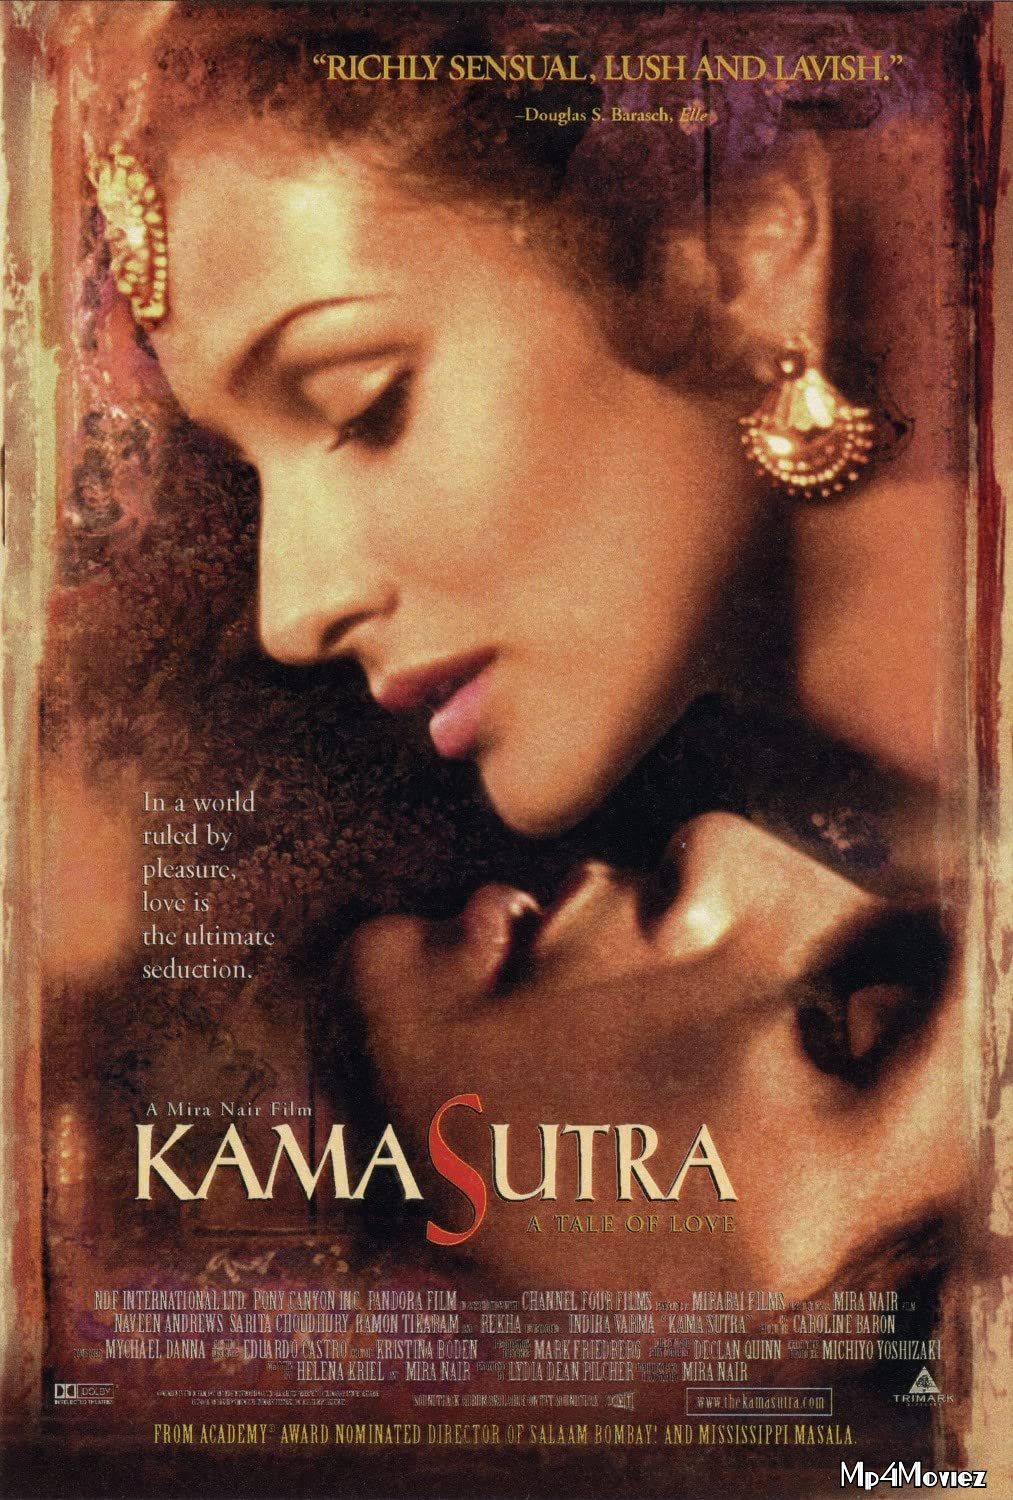 Kama Sutra: A Tale of Love (1996) Hindi Dubbed BluRay download full movie